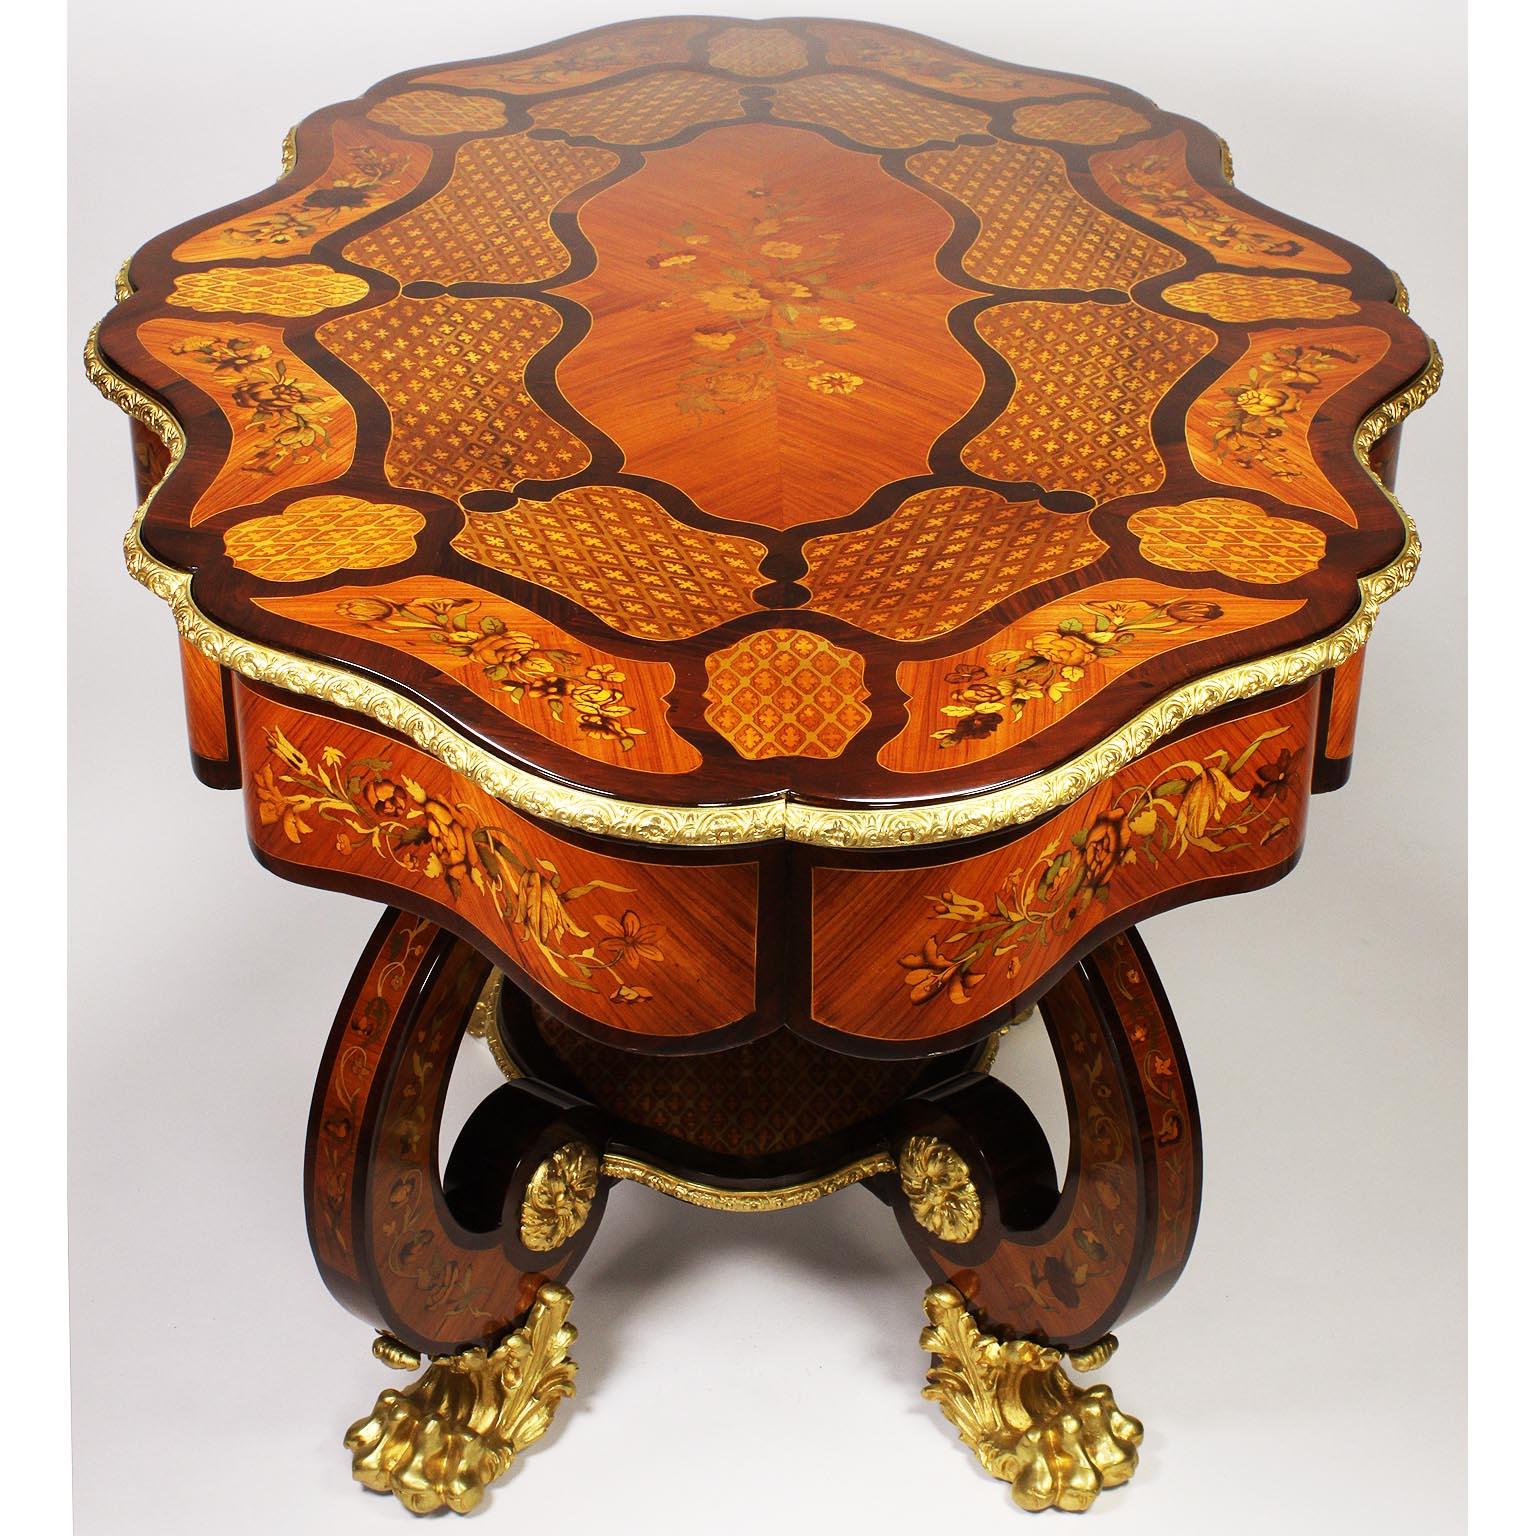 Fine Italian 19th Century Floral Marquetry Gilt Bronze-Mounted Center Table Desk For Sale 5